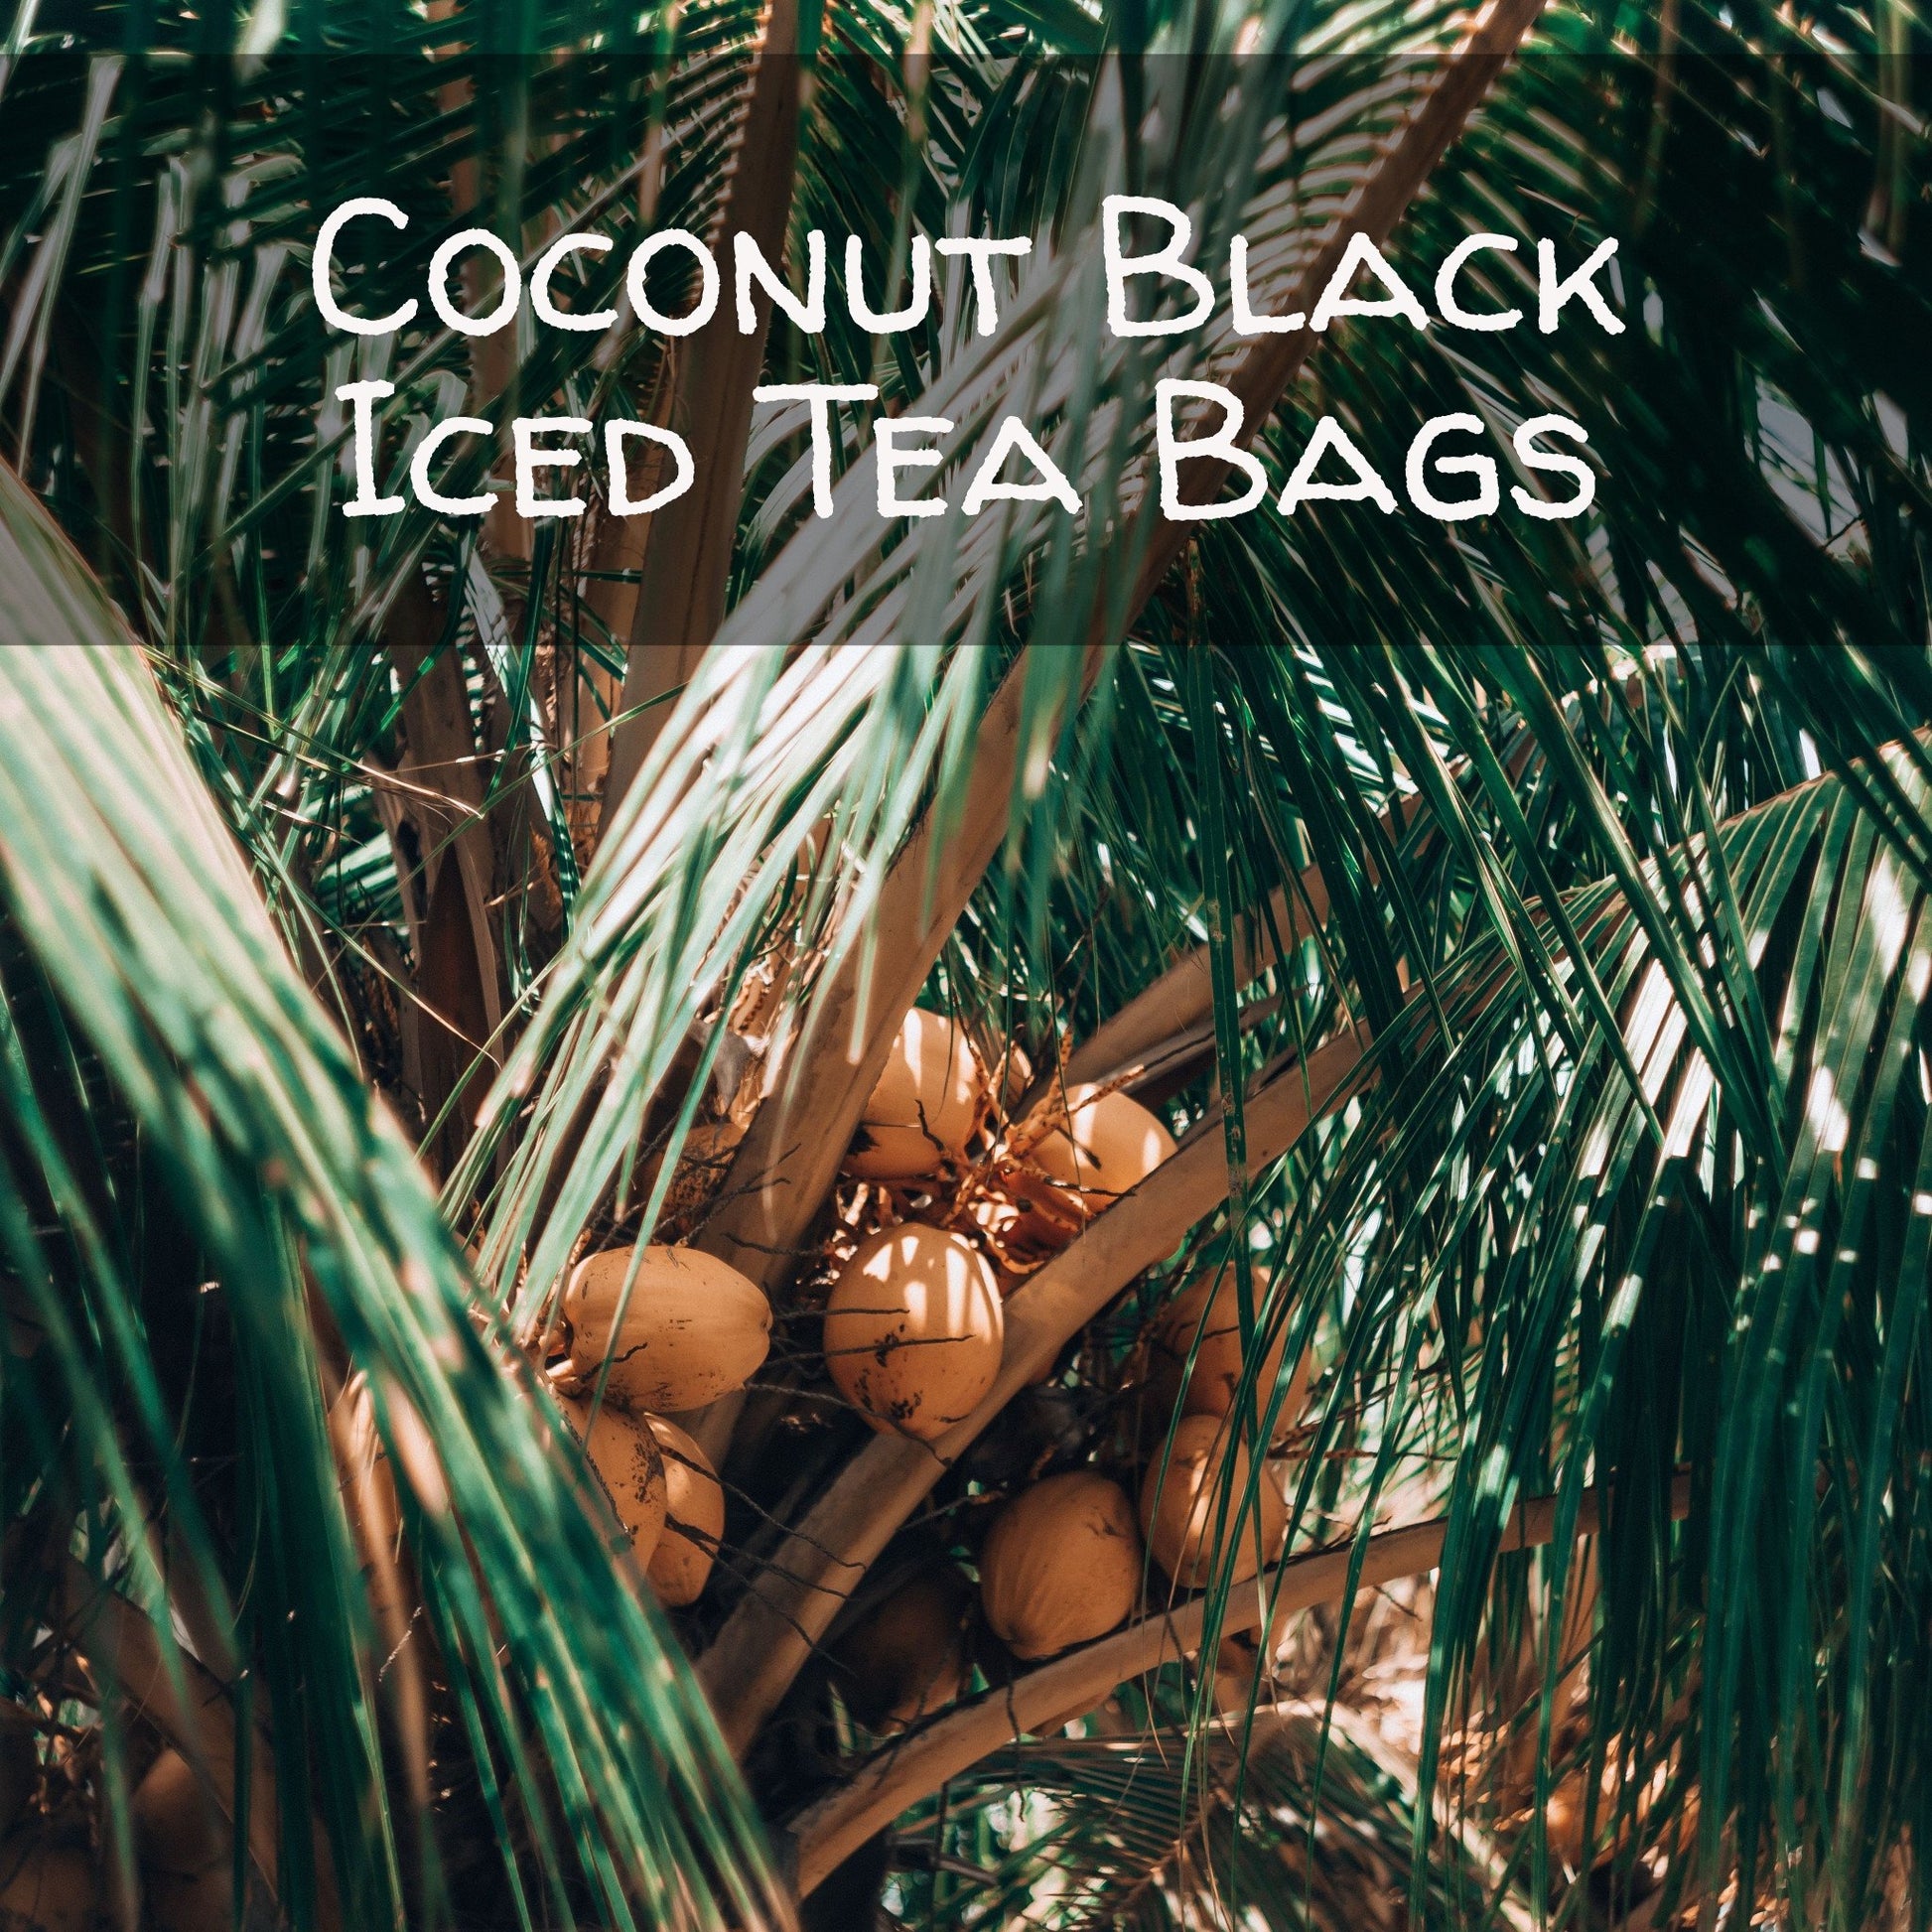 Coconut Black Iced Tea Bags, available in quantities of 1, 6 or 12 quart size pouches Iced Tea The Grateful Tea Co. 